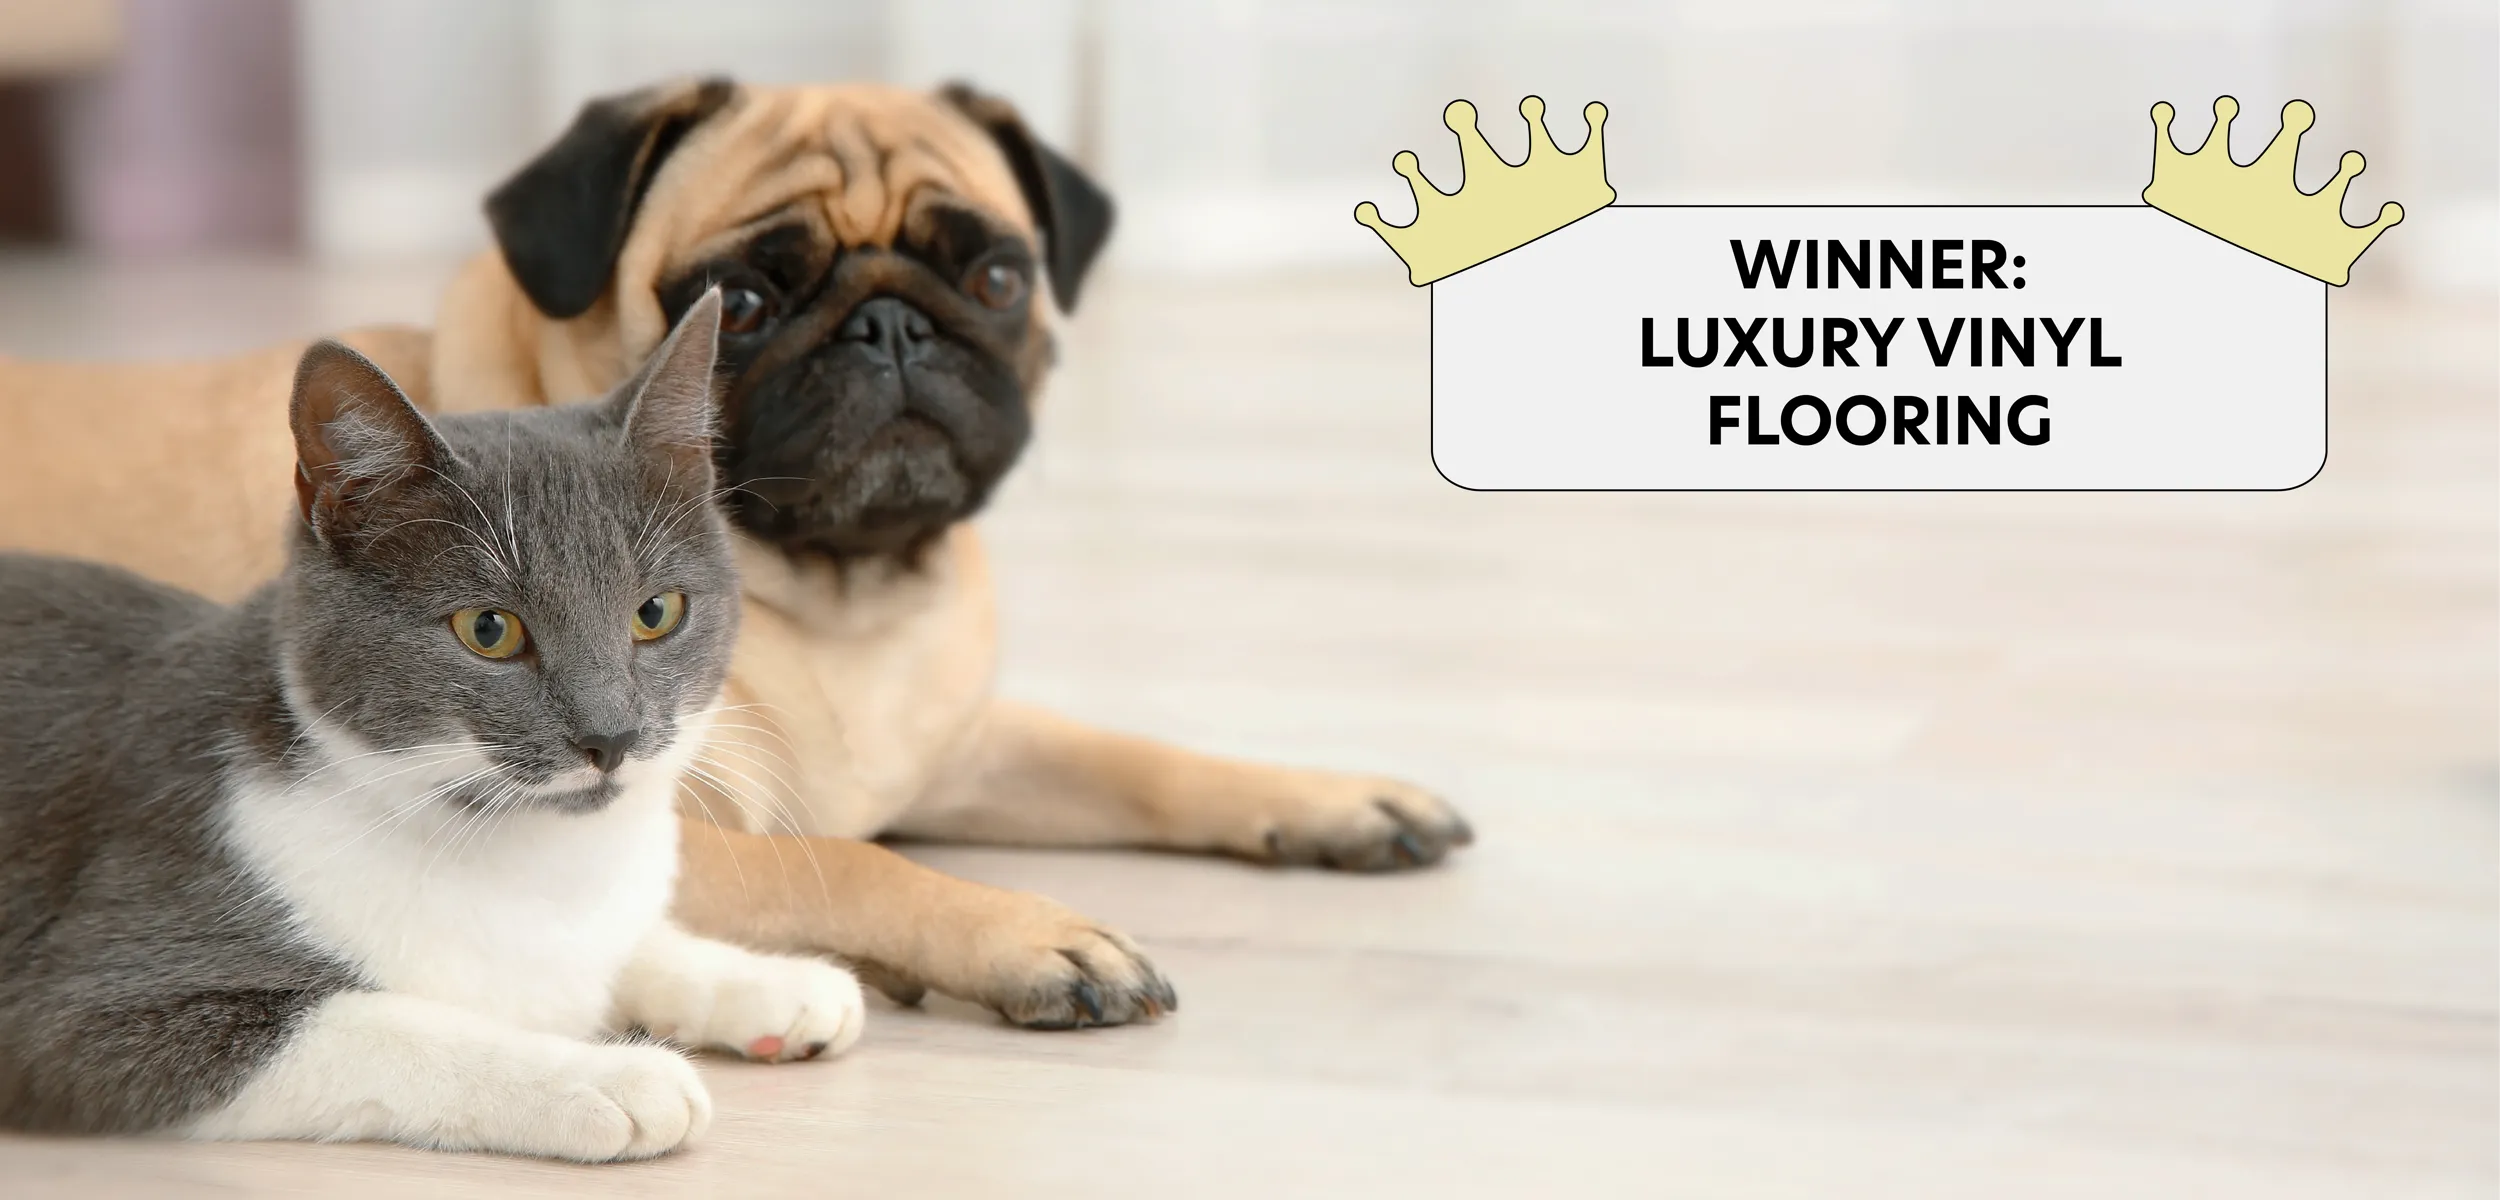 Dog and cat laying next to each other on top of Luxury Vinyl Flooring.